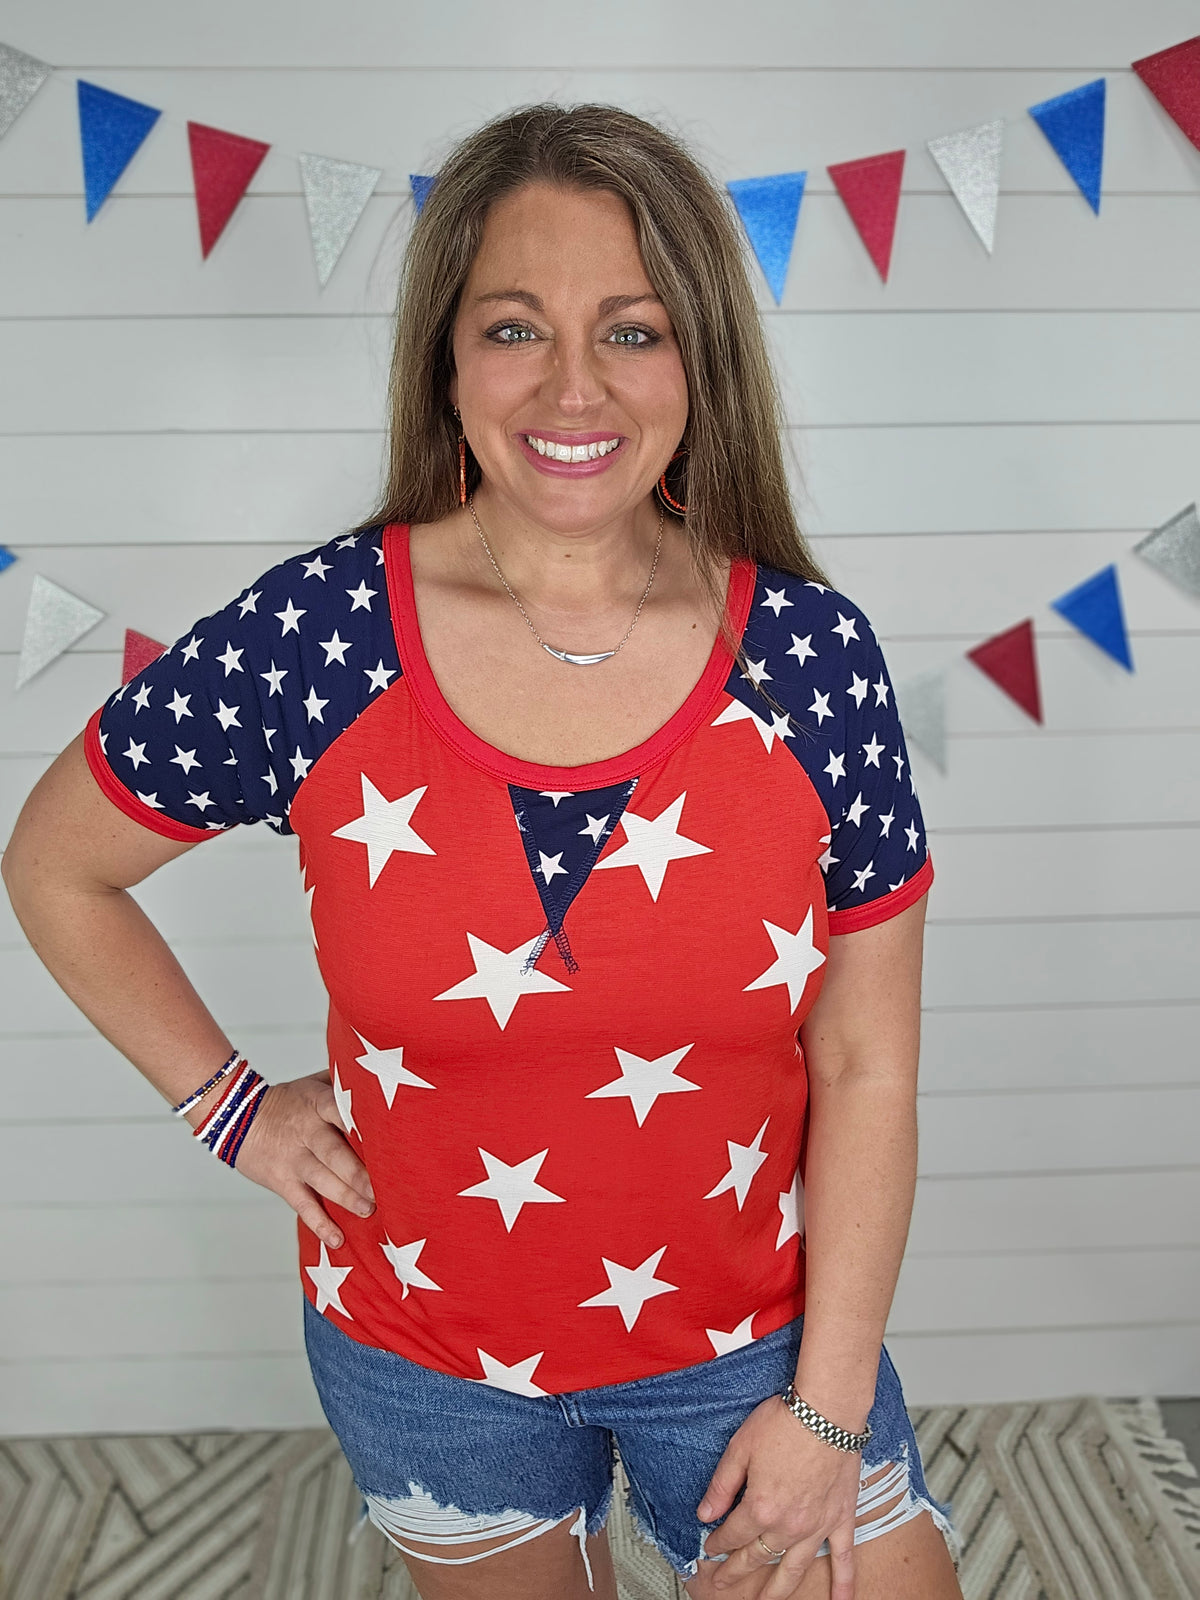 RED STAR TOP W/ BLUE STAR ACCENTS